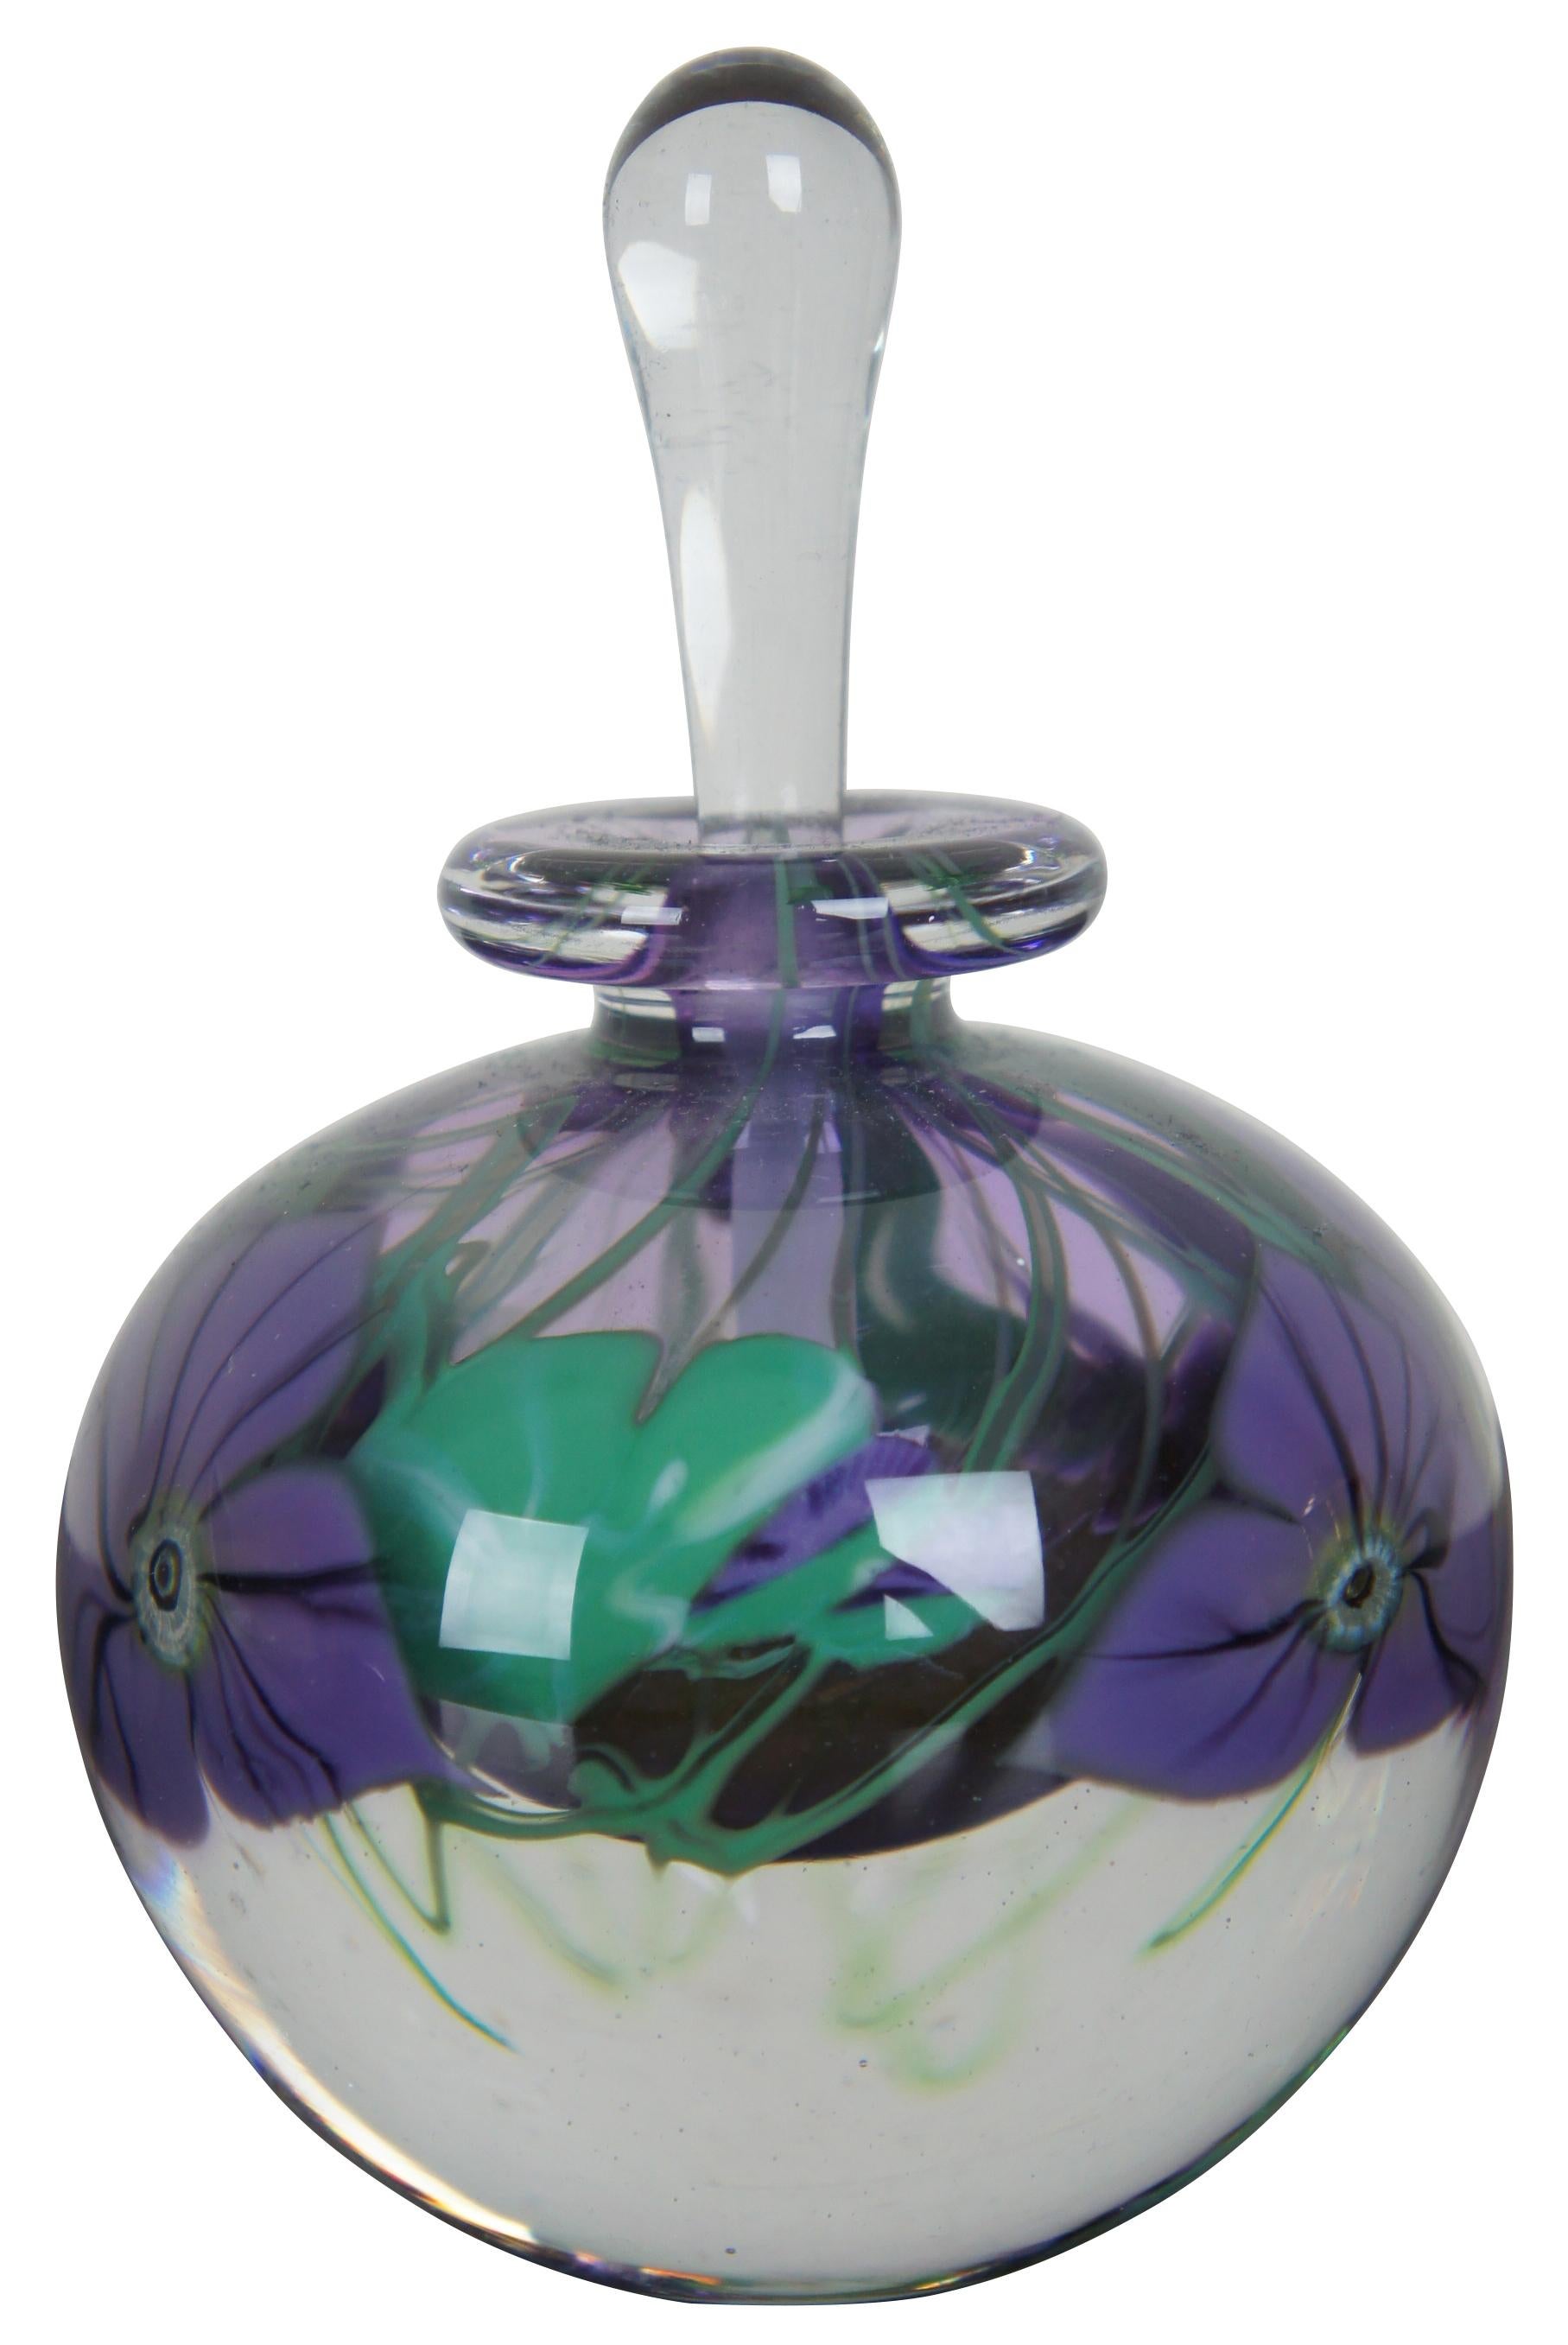 Mary Angus 1983 hand blown art glass perfume bottle and stopper with an injected design of black veined, purple flowers and green leaves. Measure: 6